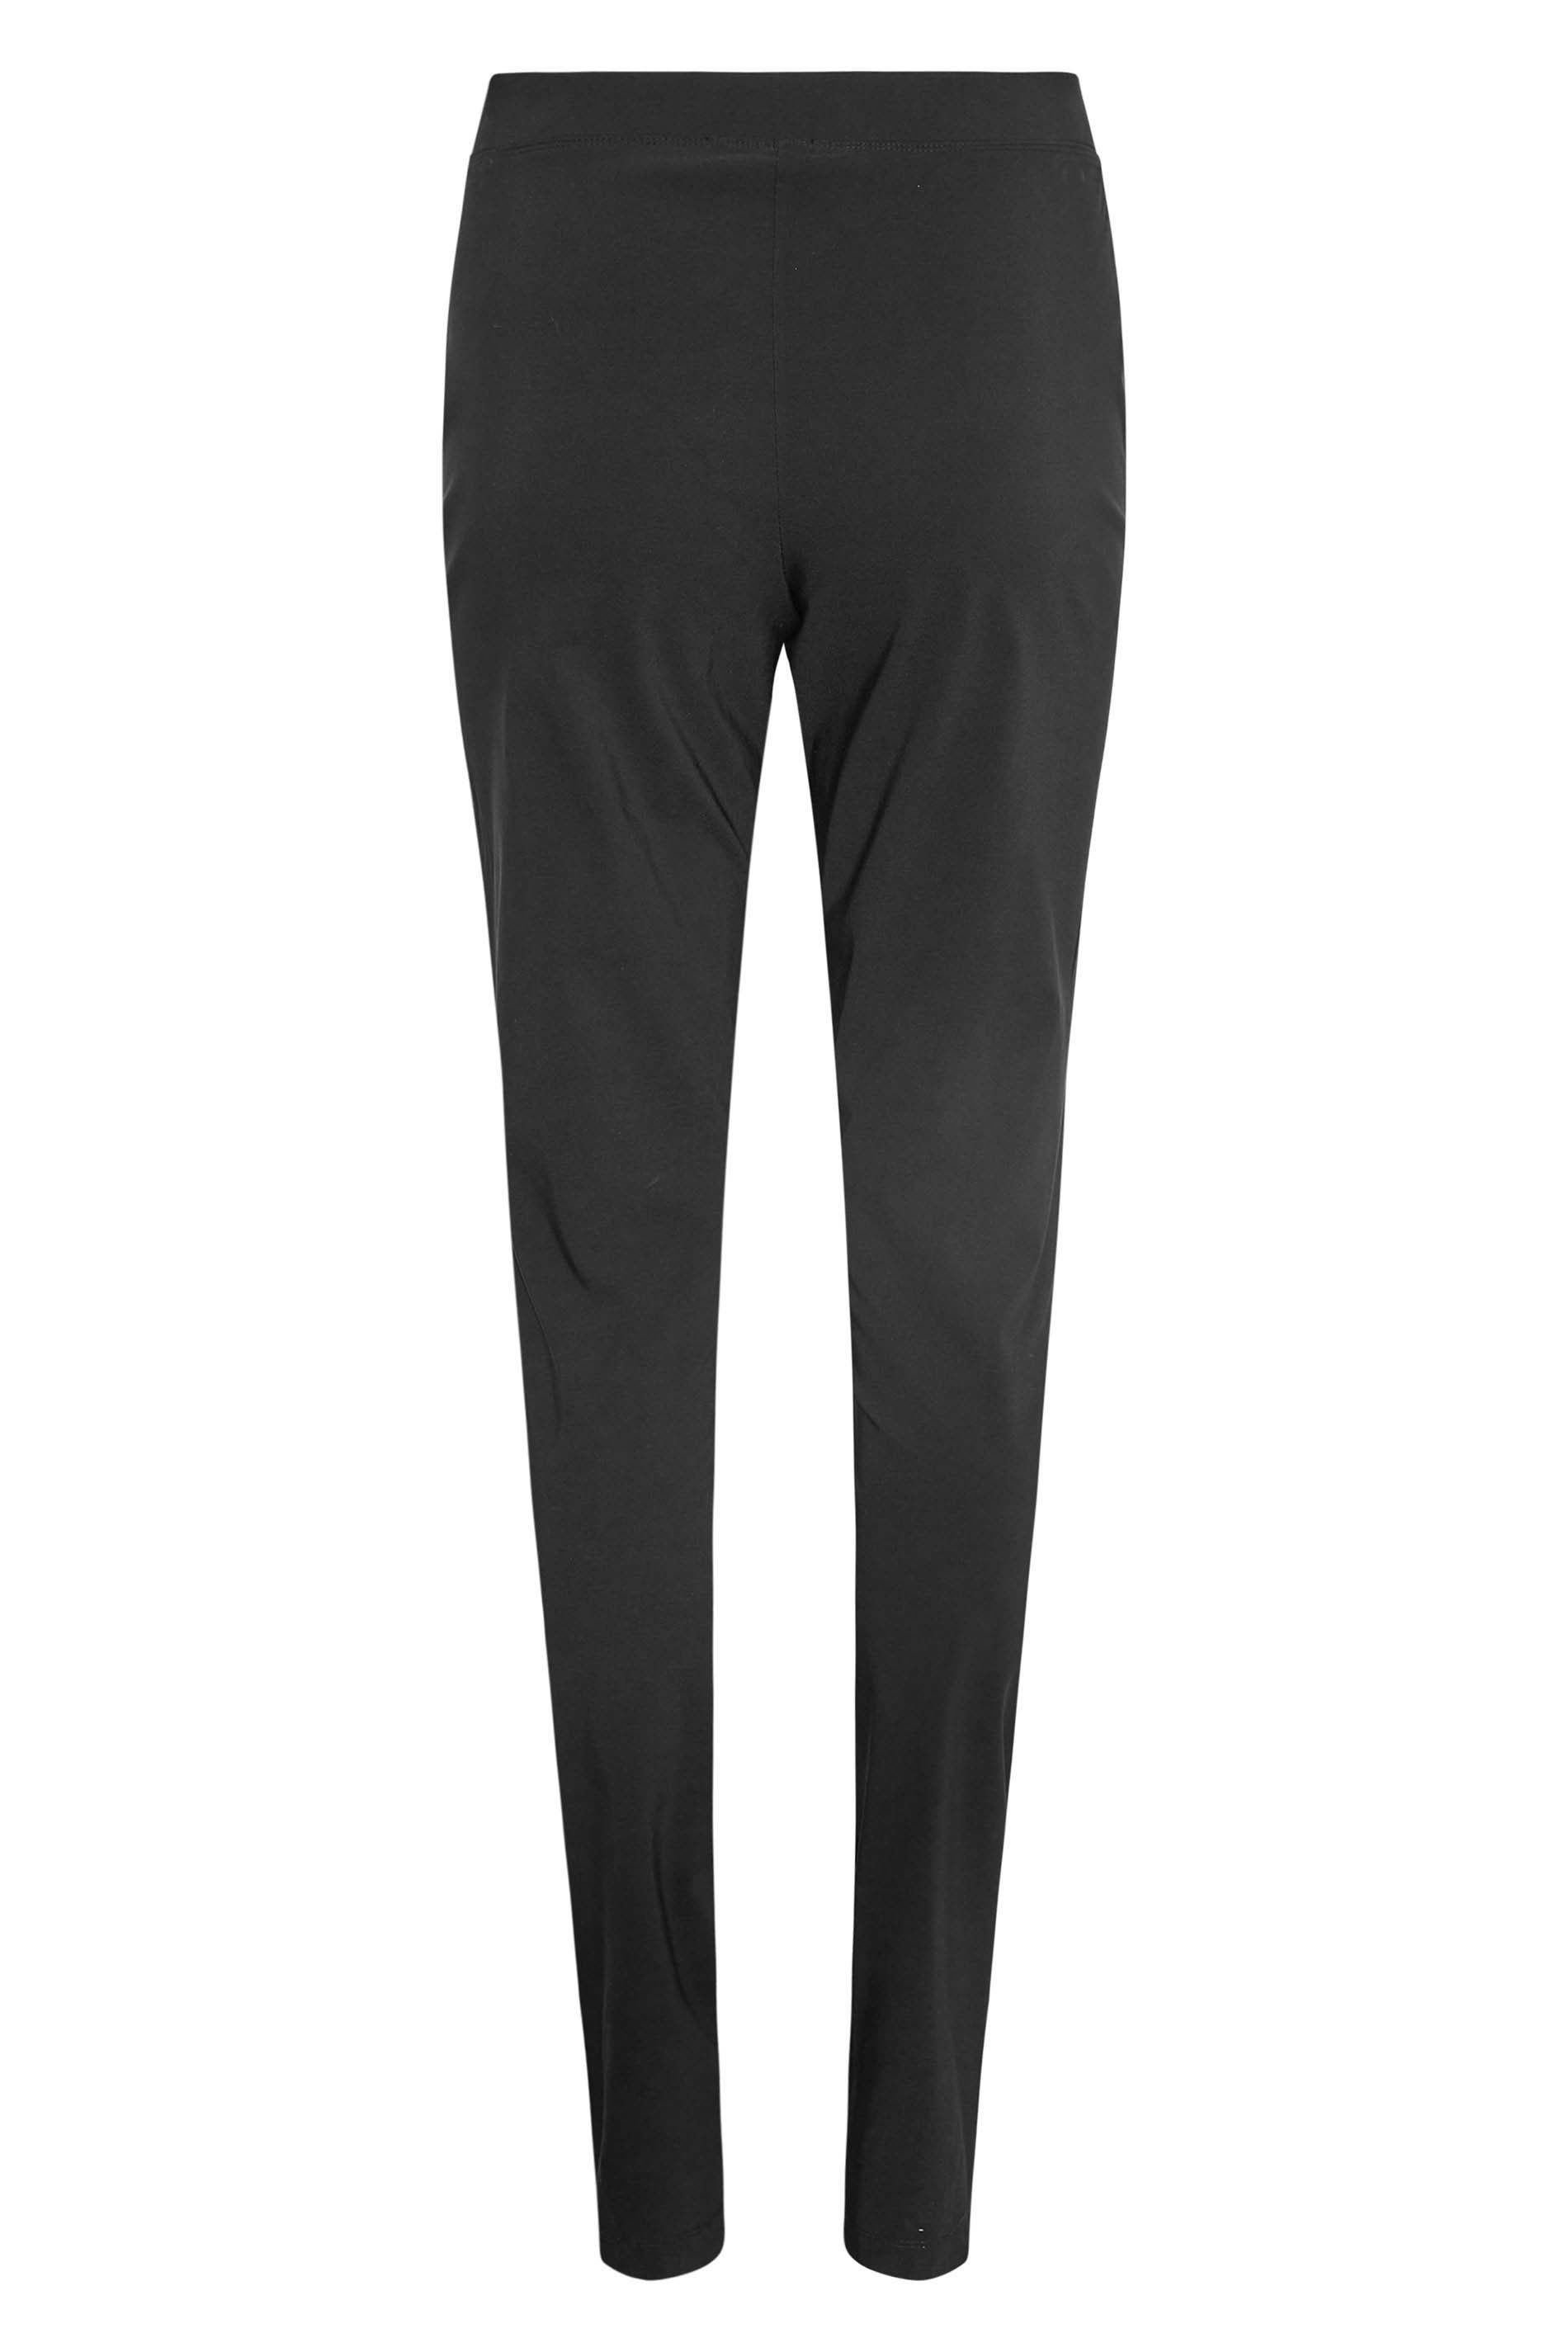 LTS Tall Navy Blue Stretch Skinny Trousers  Long Tall Sally